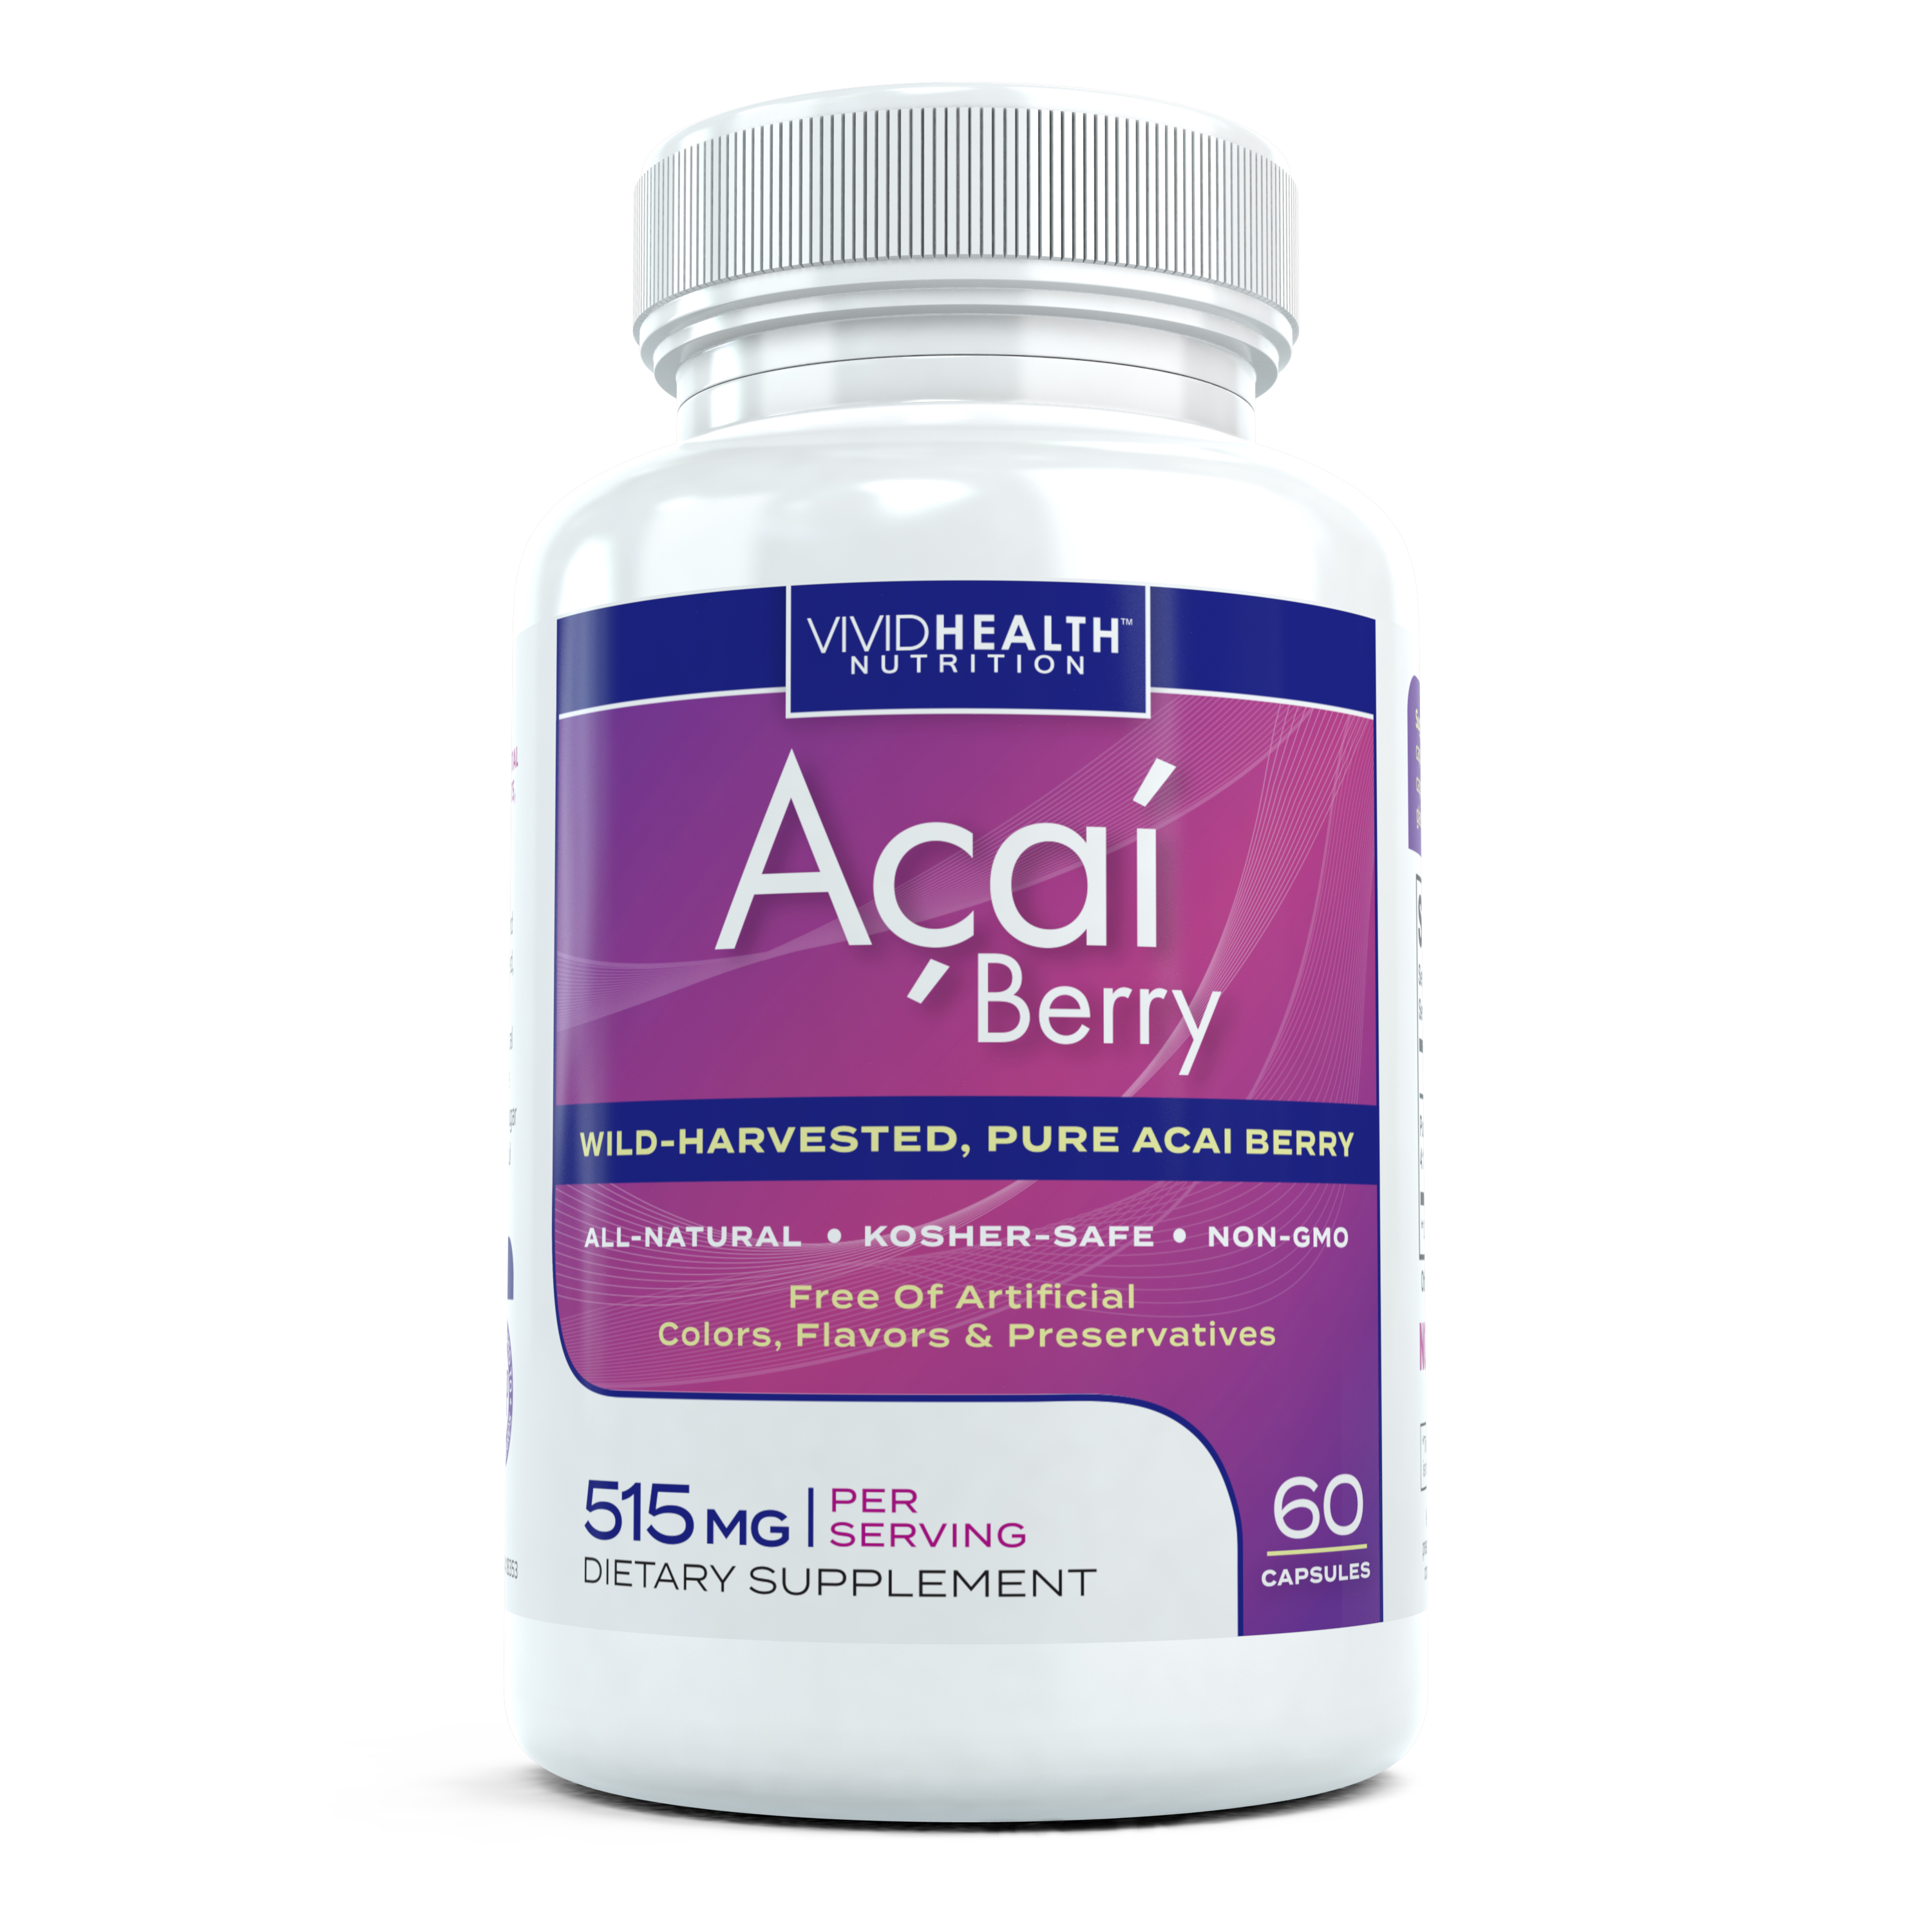 All Natural Acai Berry Supplement | Maximum Strength Vitamin to Boost Metabolism | Acai Berry Cleanse for Detoxification & Weight Loss, 60 capsules - image 1 of 8